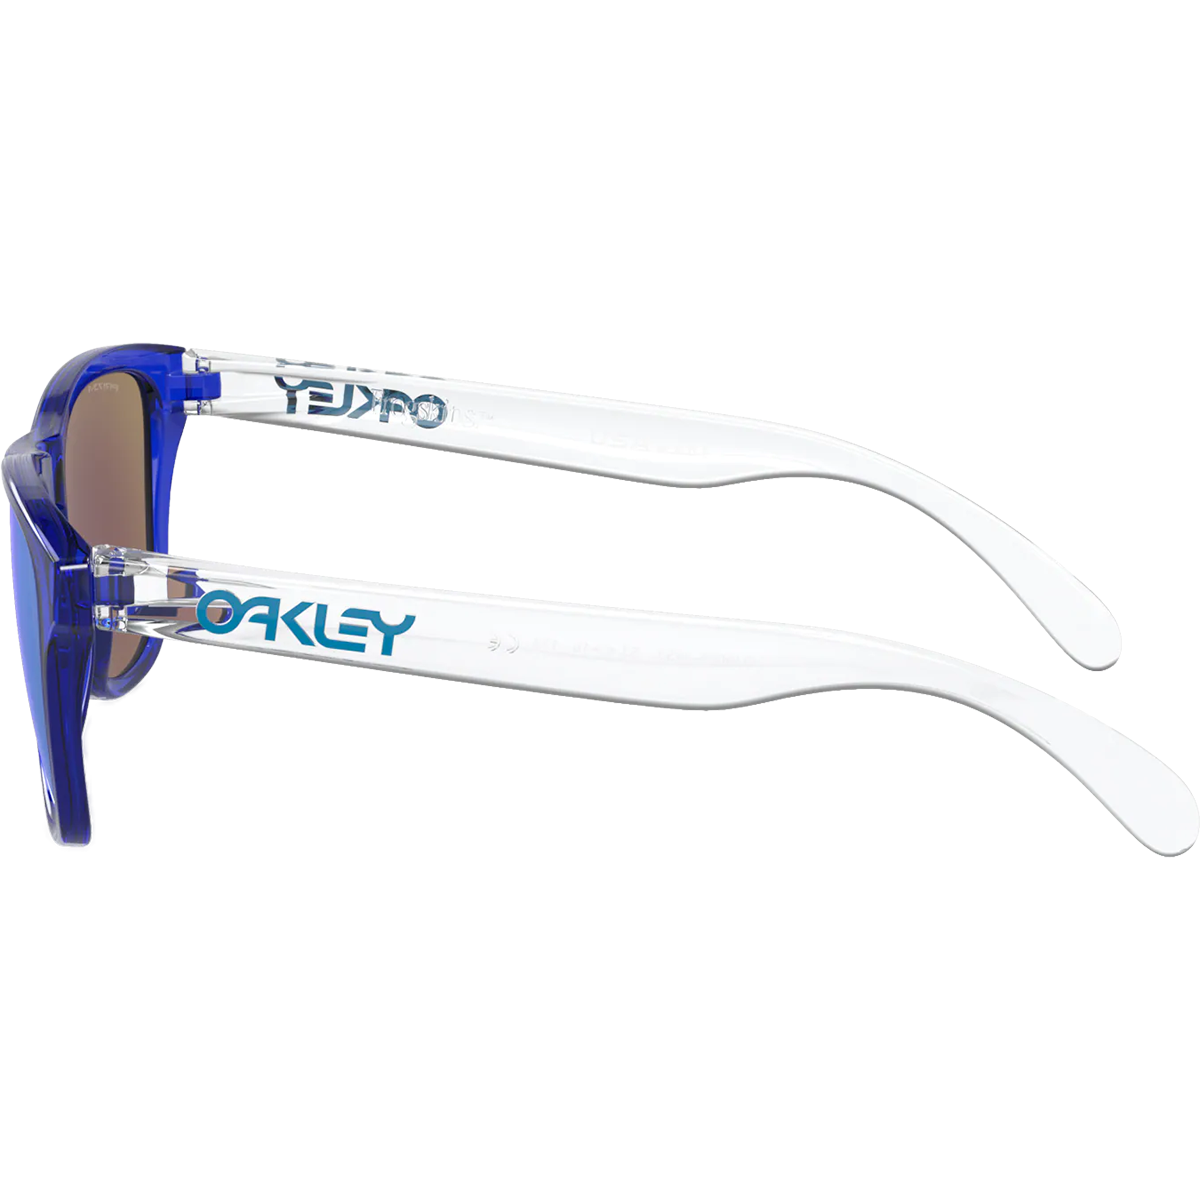 Youth Frogskins XS - Crystal Blue/Prizm Sapphire alternate view